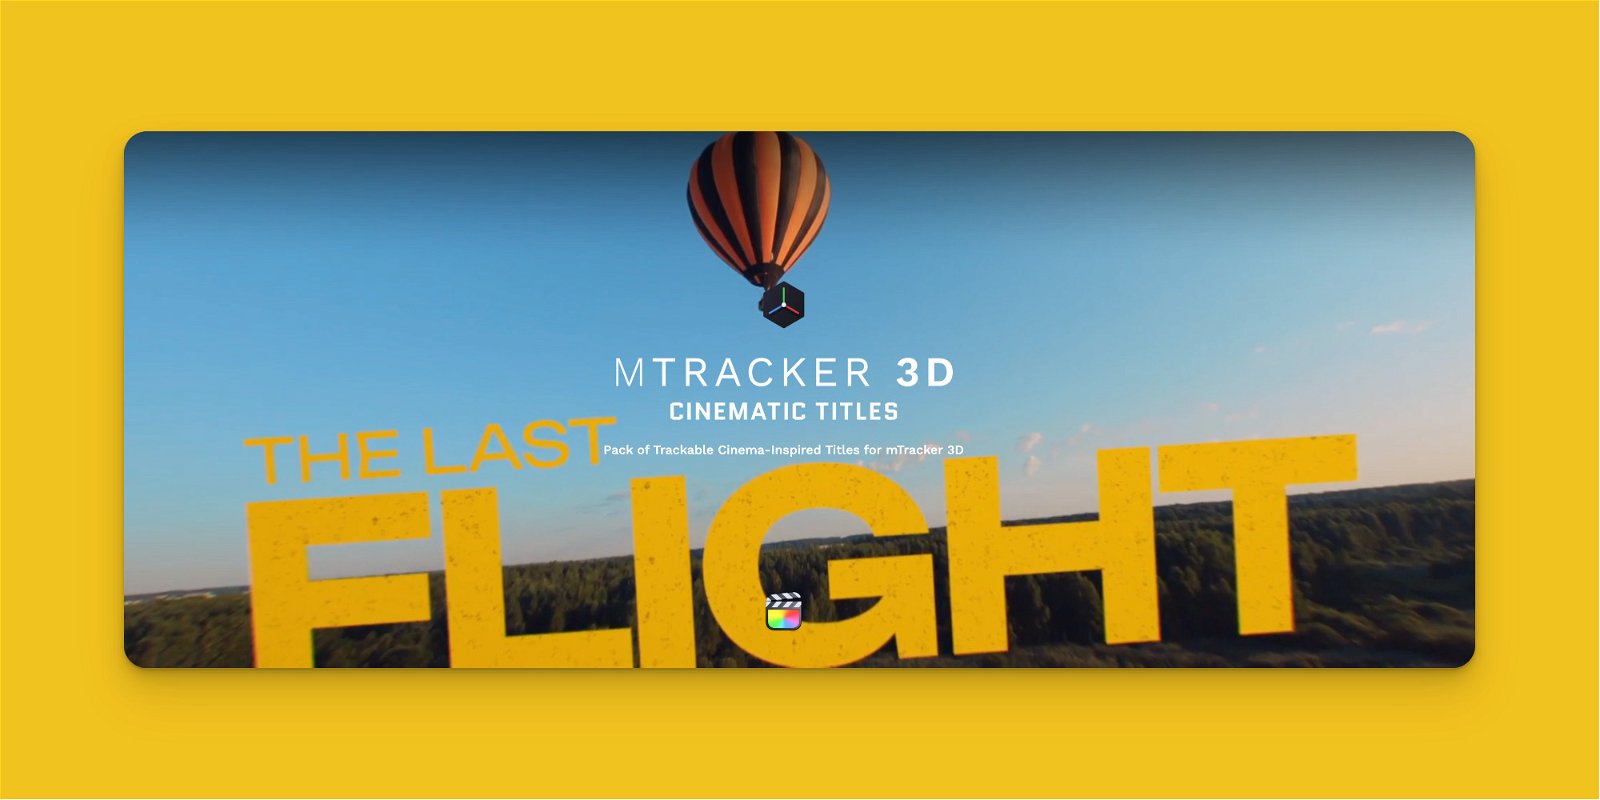 mTracker 3D Cinematic Titles